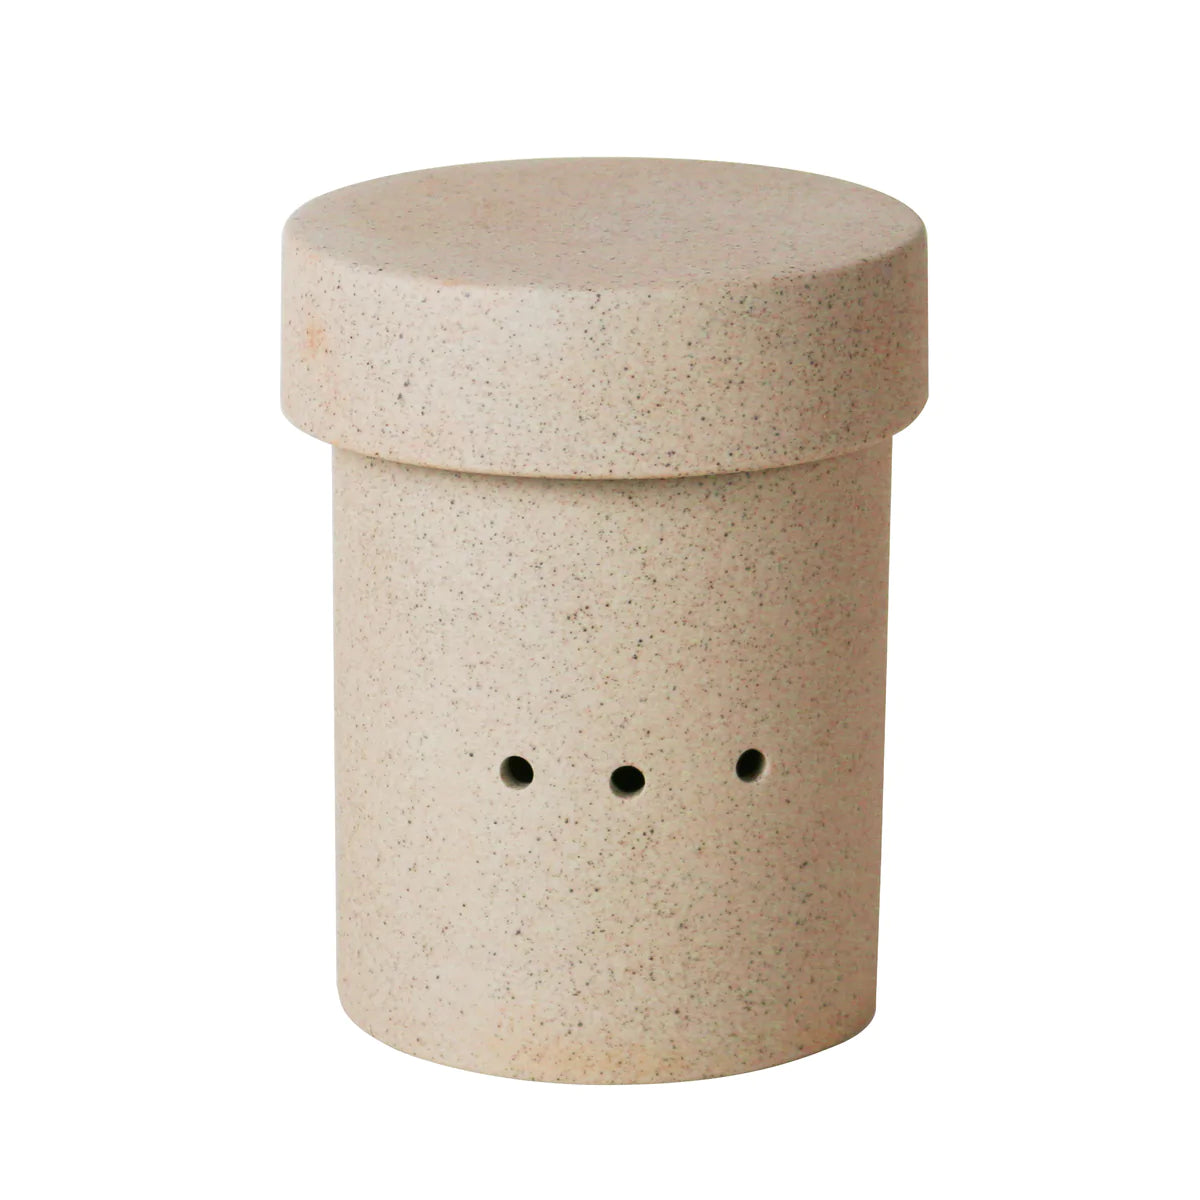 Handy Little Things - Garlic Canister